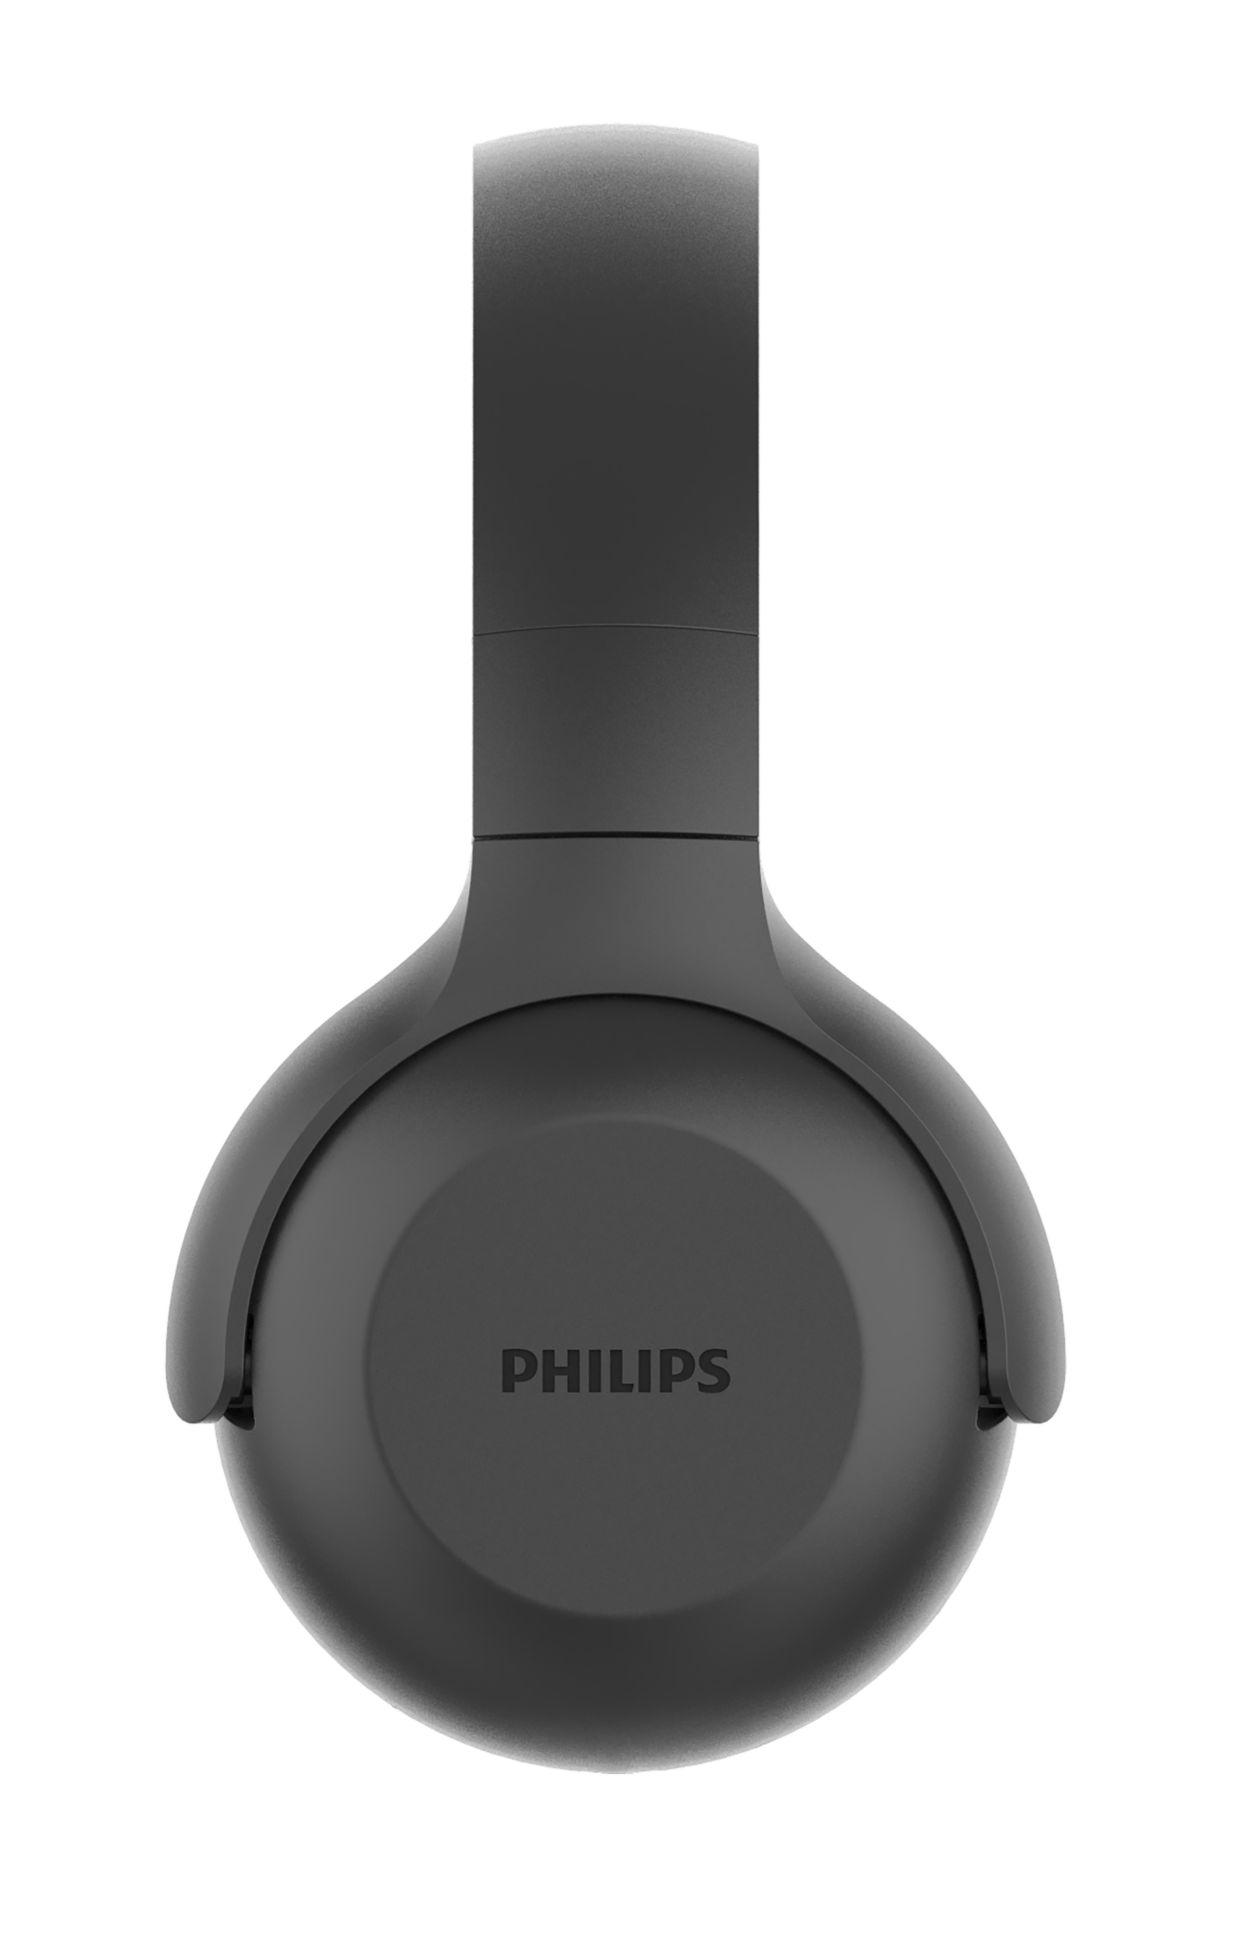 Selected image for Philips TAUH202BK/00 Bluetooth slušalice, Crne